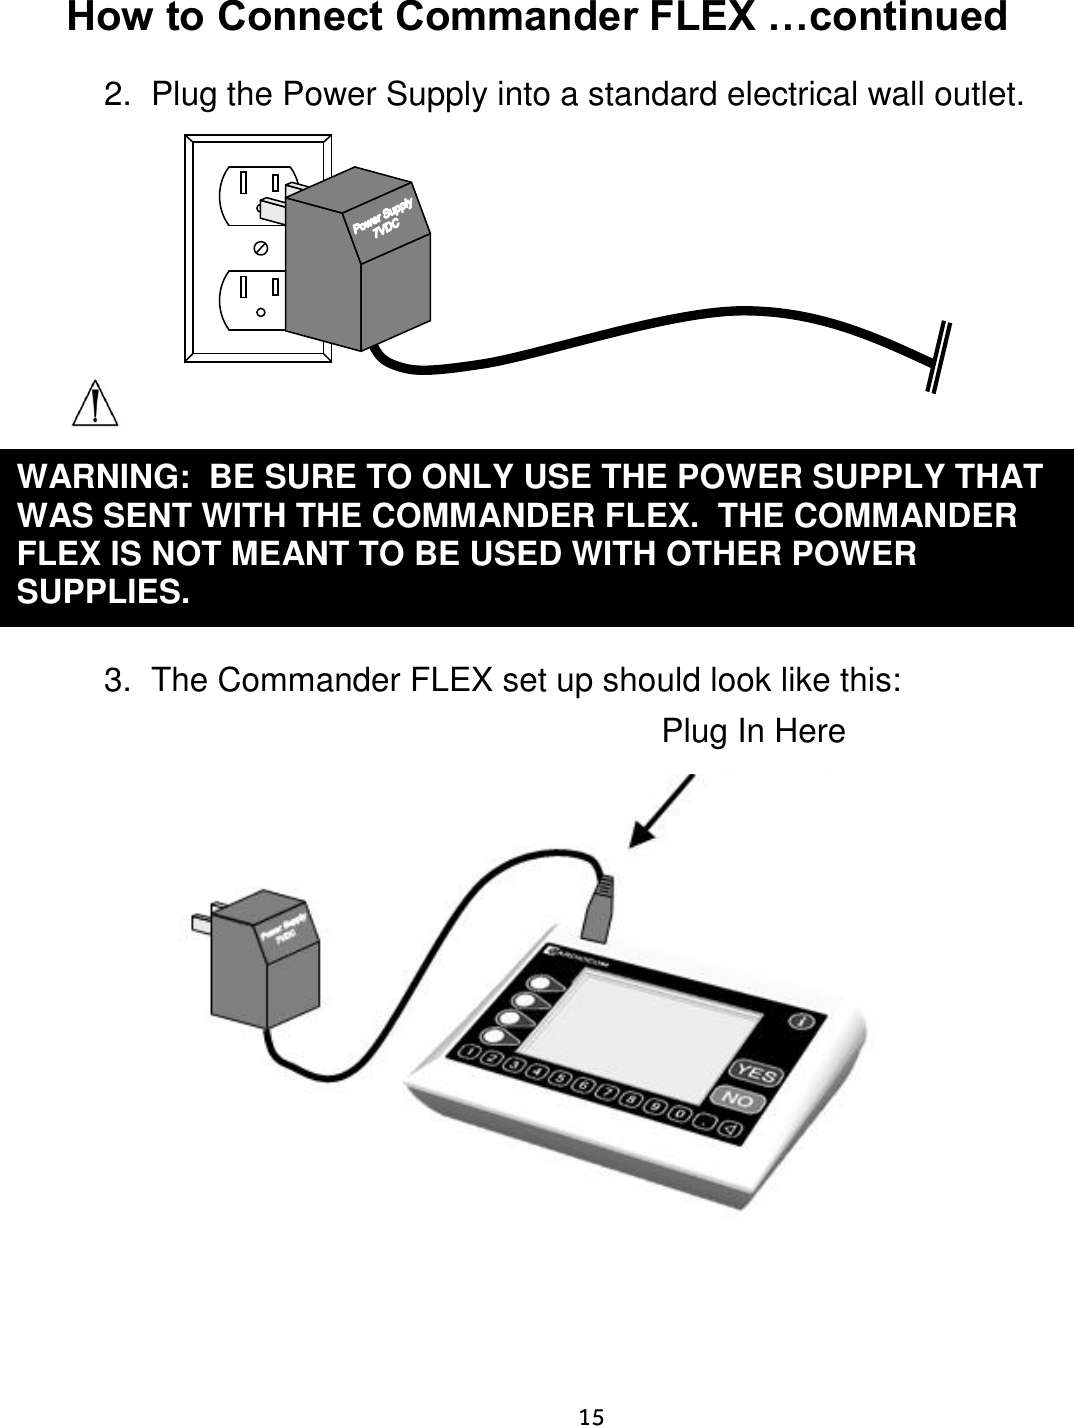     15  How to Connect Commander FLEX …continued  2.  Plug the Power Supply into a standard electrical wall outlet.          3.  The Commander FLEX set up should look like this:                                                   WARNING:  BE SURE TO ONLY USE THE POWER SUPPLY THAT WAS SENT WITH THE COMMANDER FLEX.  THE COMMANDER FLEX IS NOT MEANT TO BE USED WITH OTHER POWER SUPPLIES.     Plug In Here 